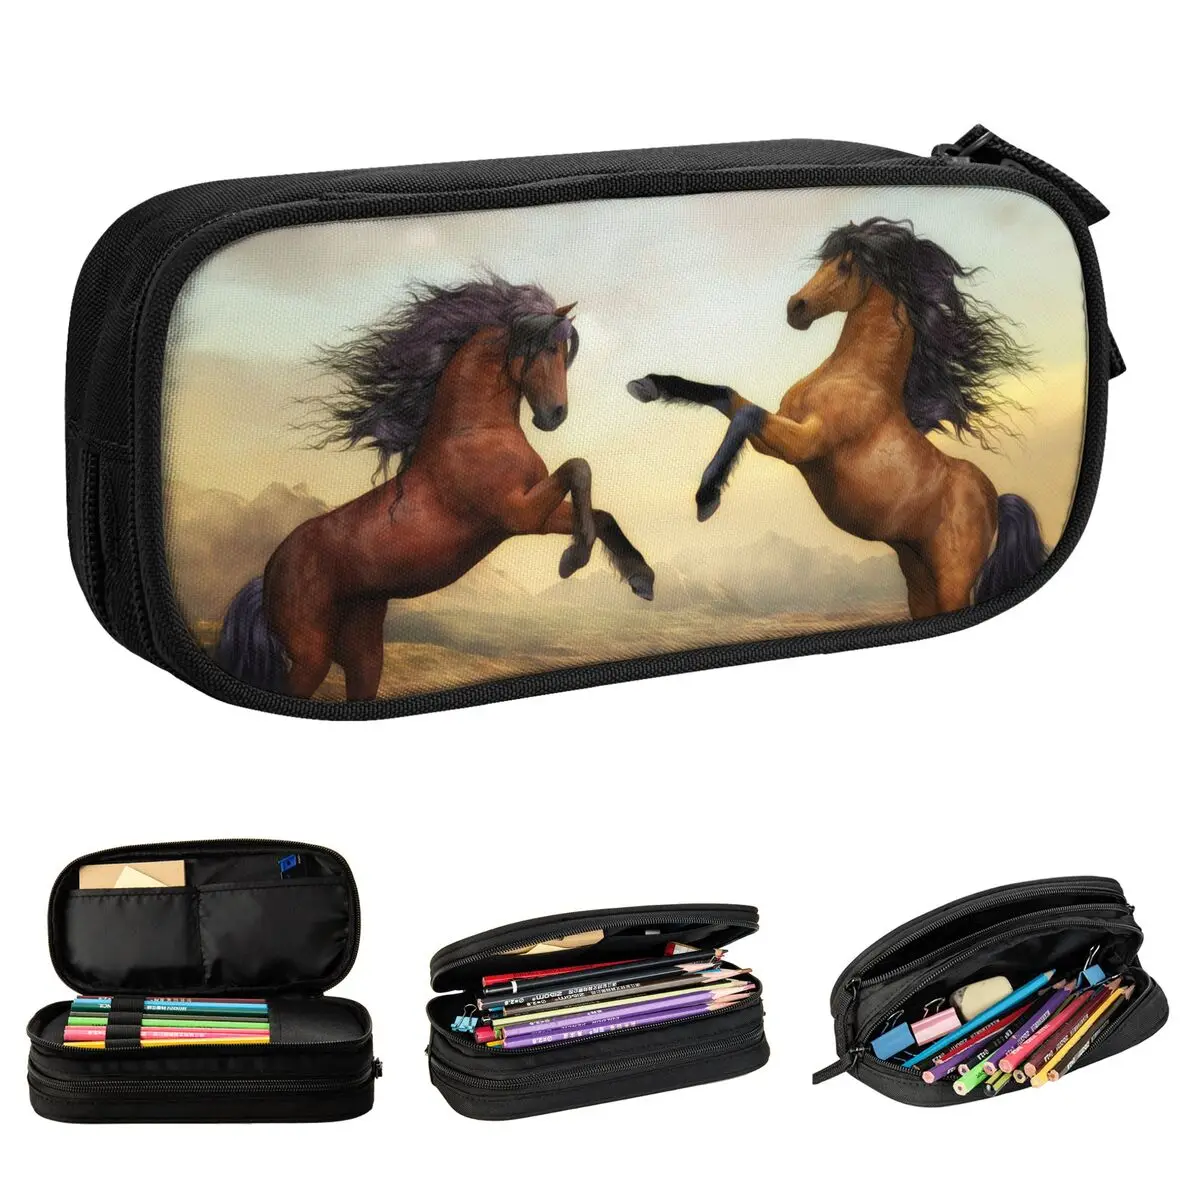 

Brown Horse Pencil Cases Galloping Animal Lovers Pen Bags Girls Boys Large Storage Students School Zipper Pencilcases